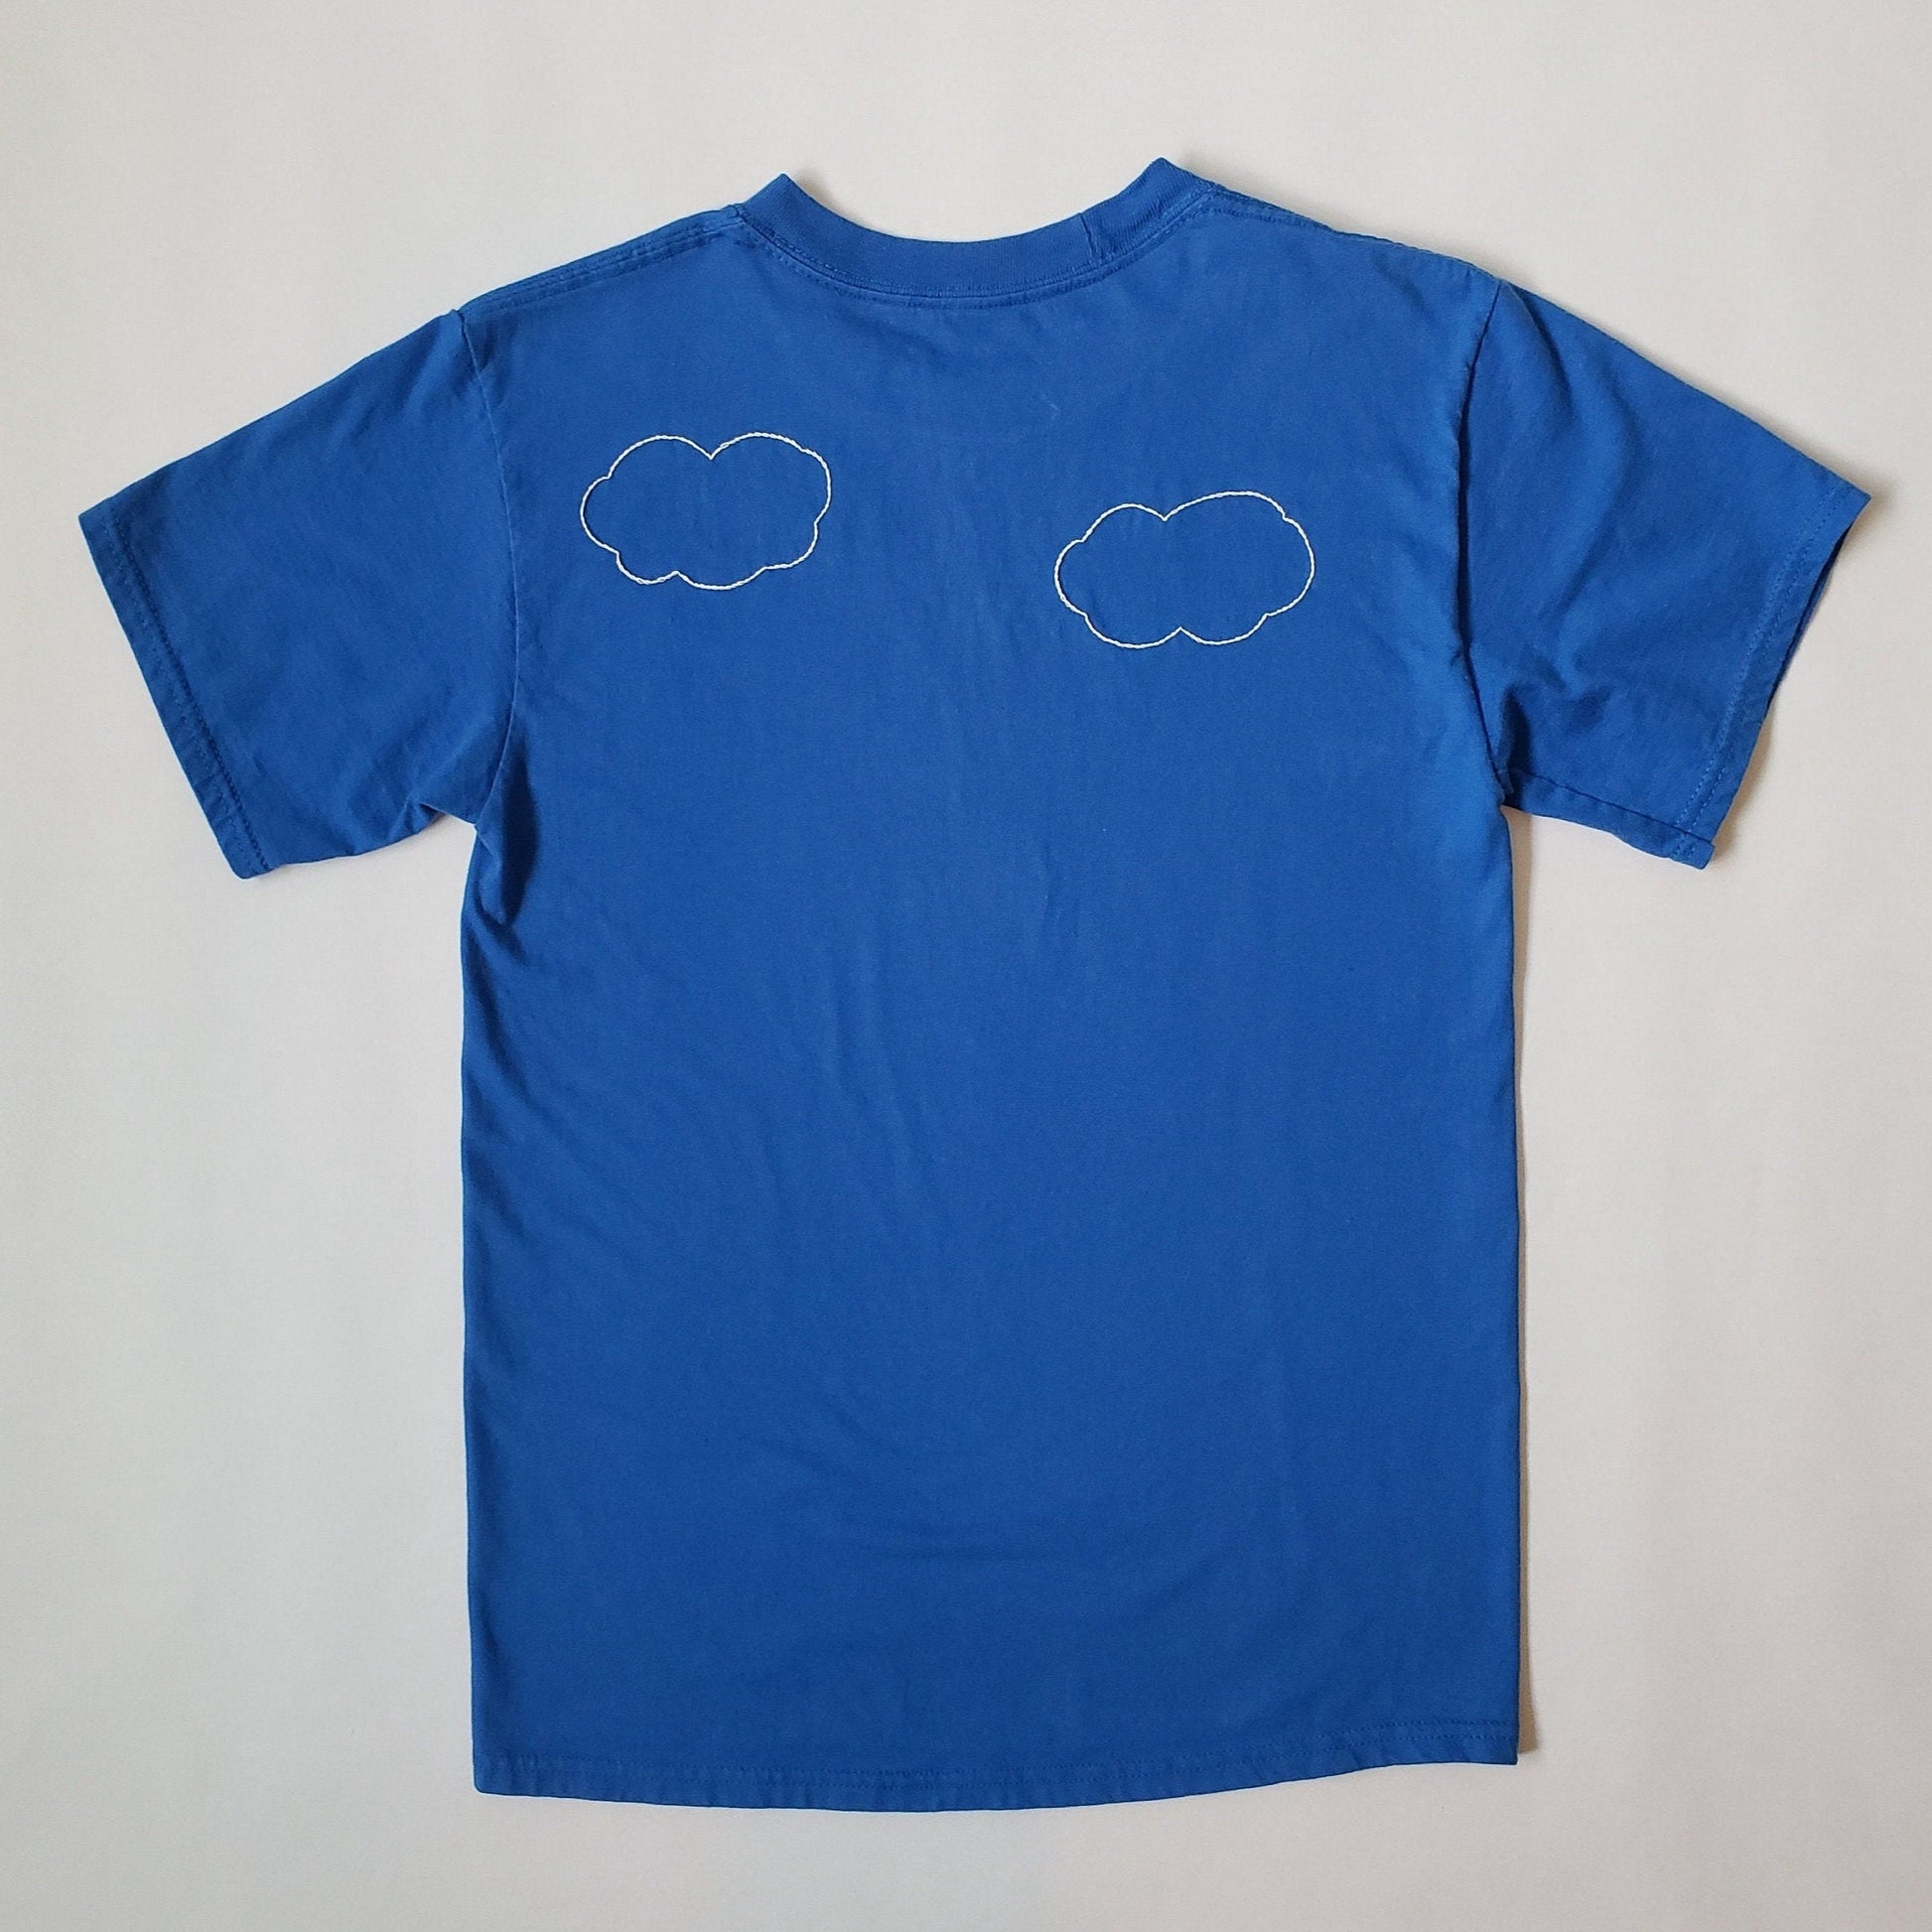 The back of the crewneck blue tee. This side has two clouds, and the one on the left is slightly higher. The clouds are hand stitched in white and have a cute cartoonish look to them.